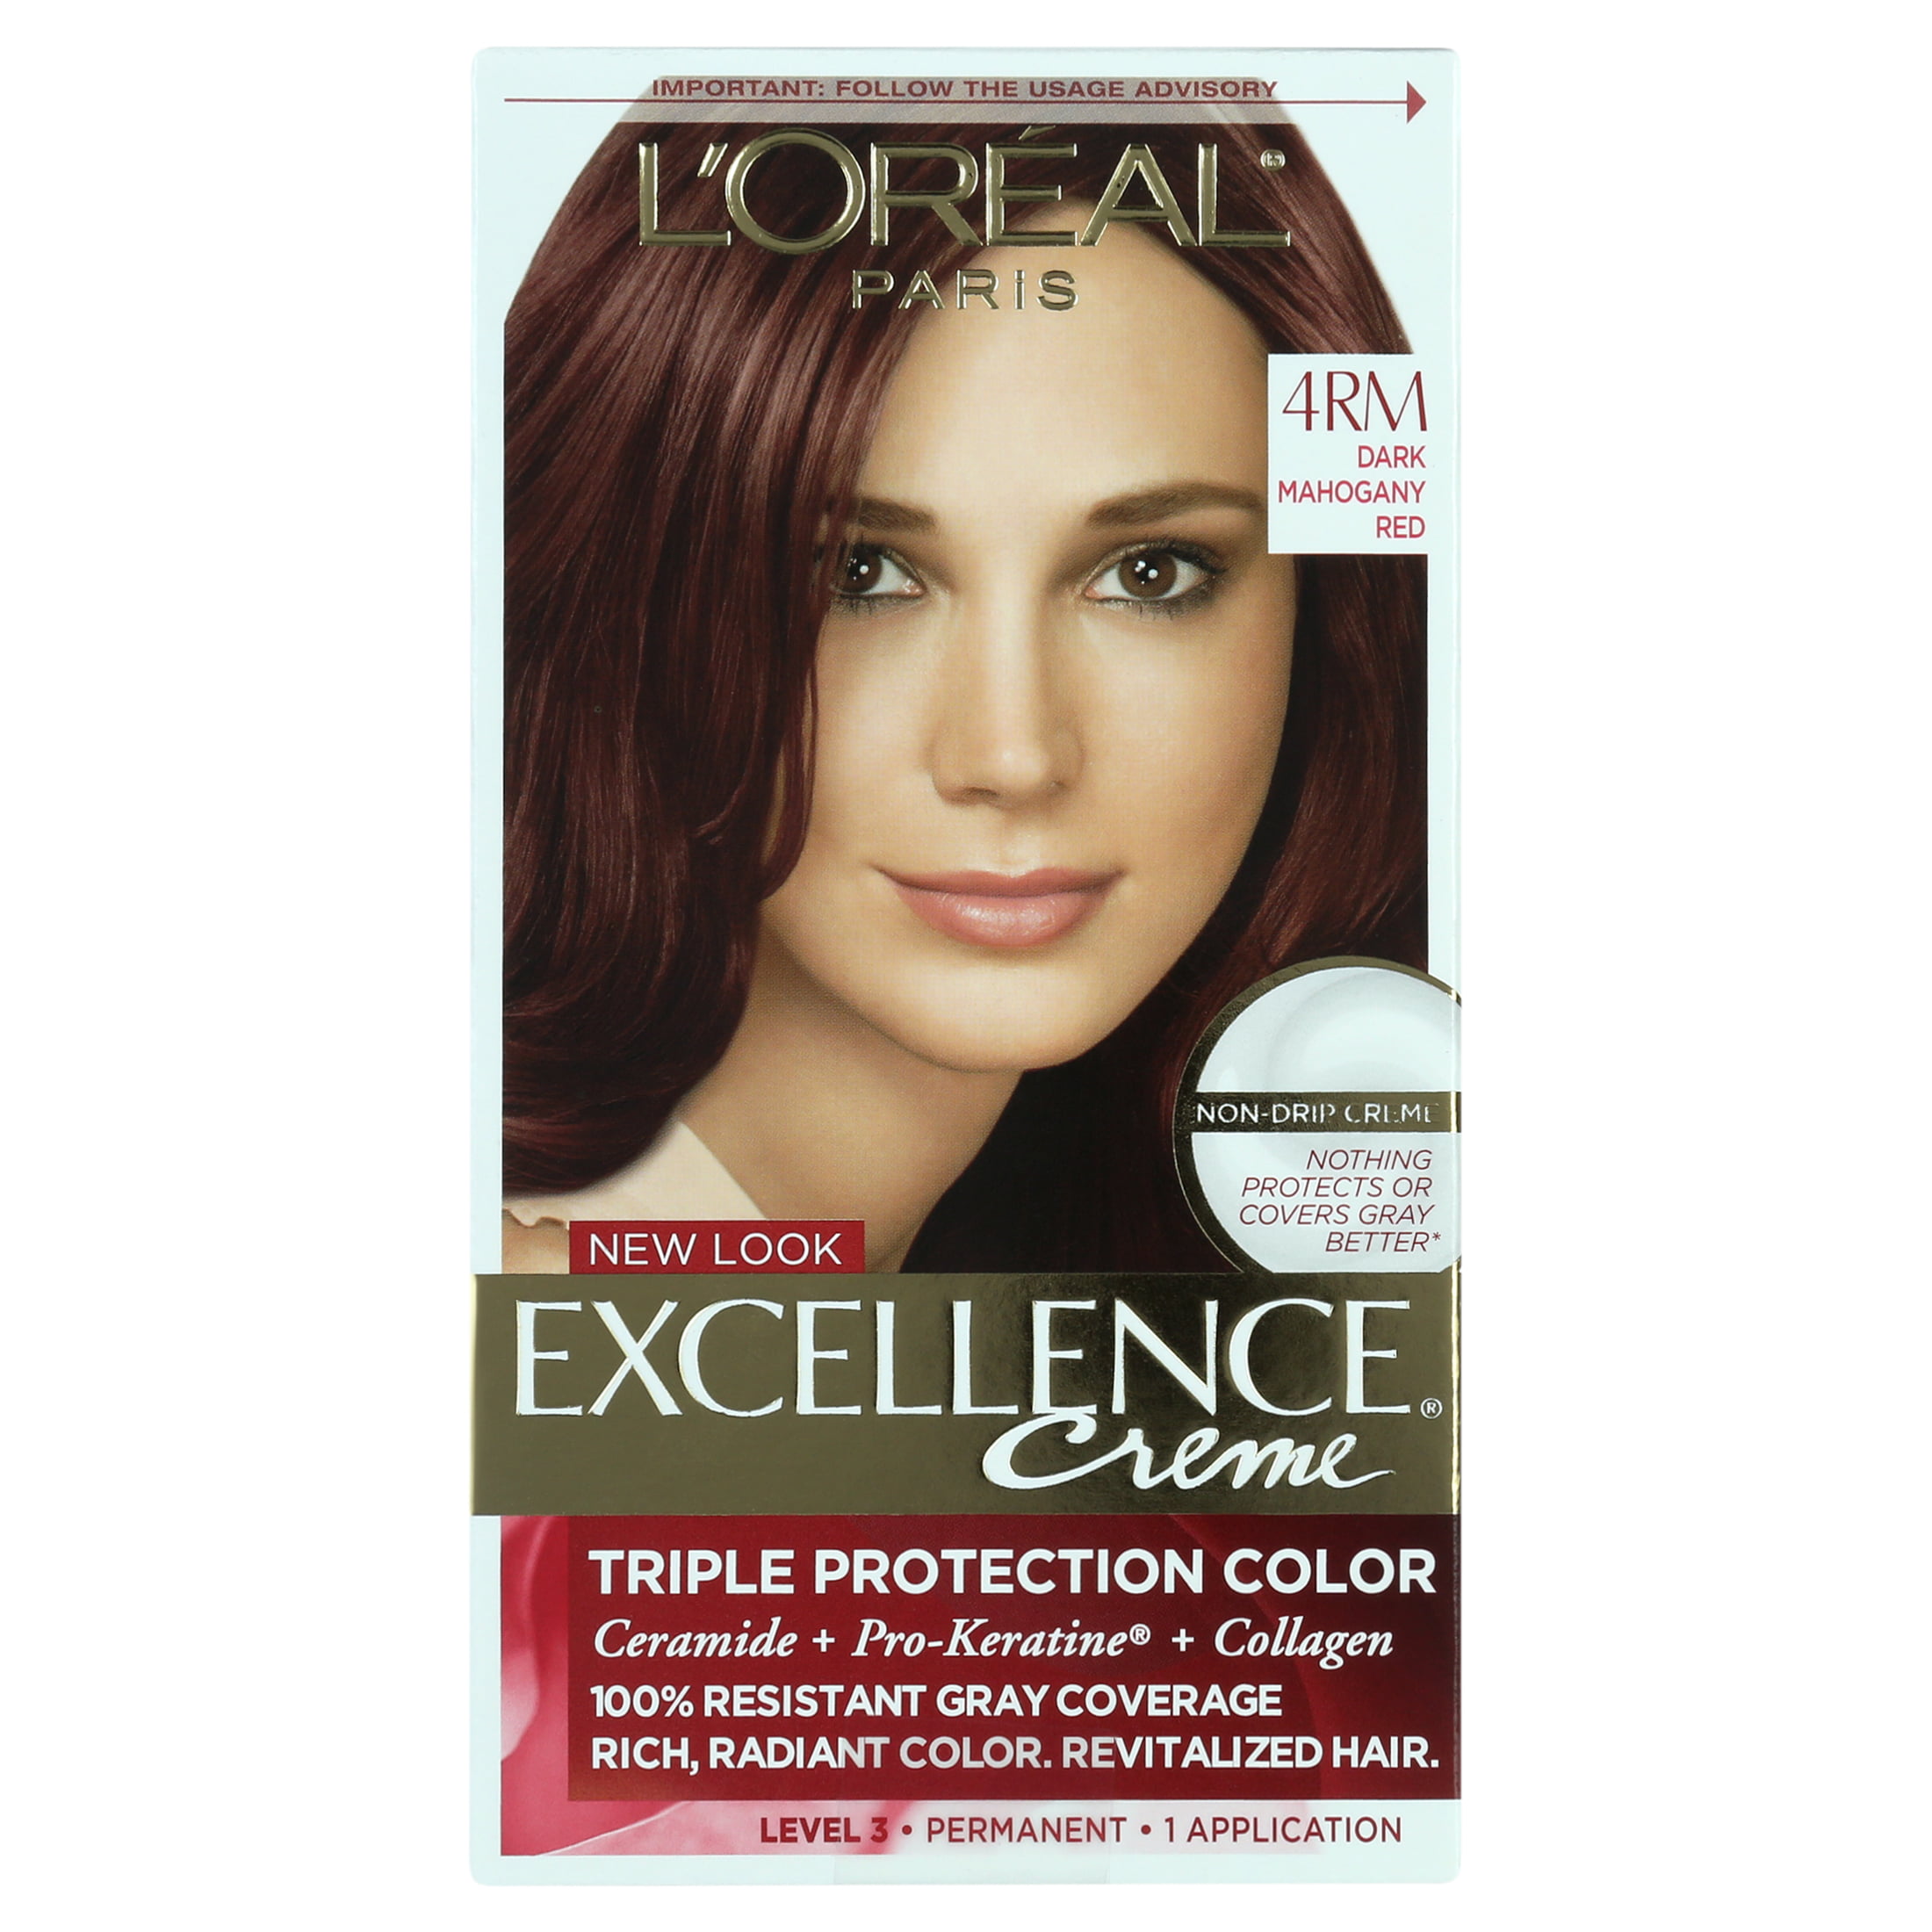 L'Oreal Paris Excellence Creme Permanent Hair Color, 4RM Dark Mahogany Red  